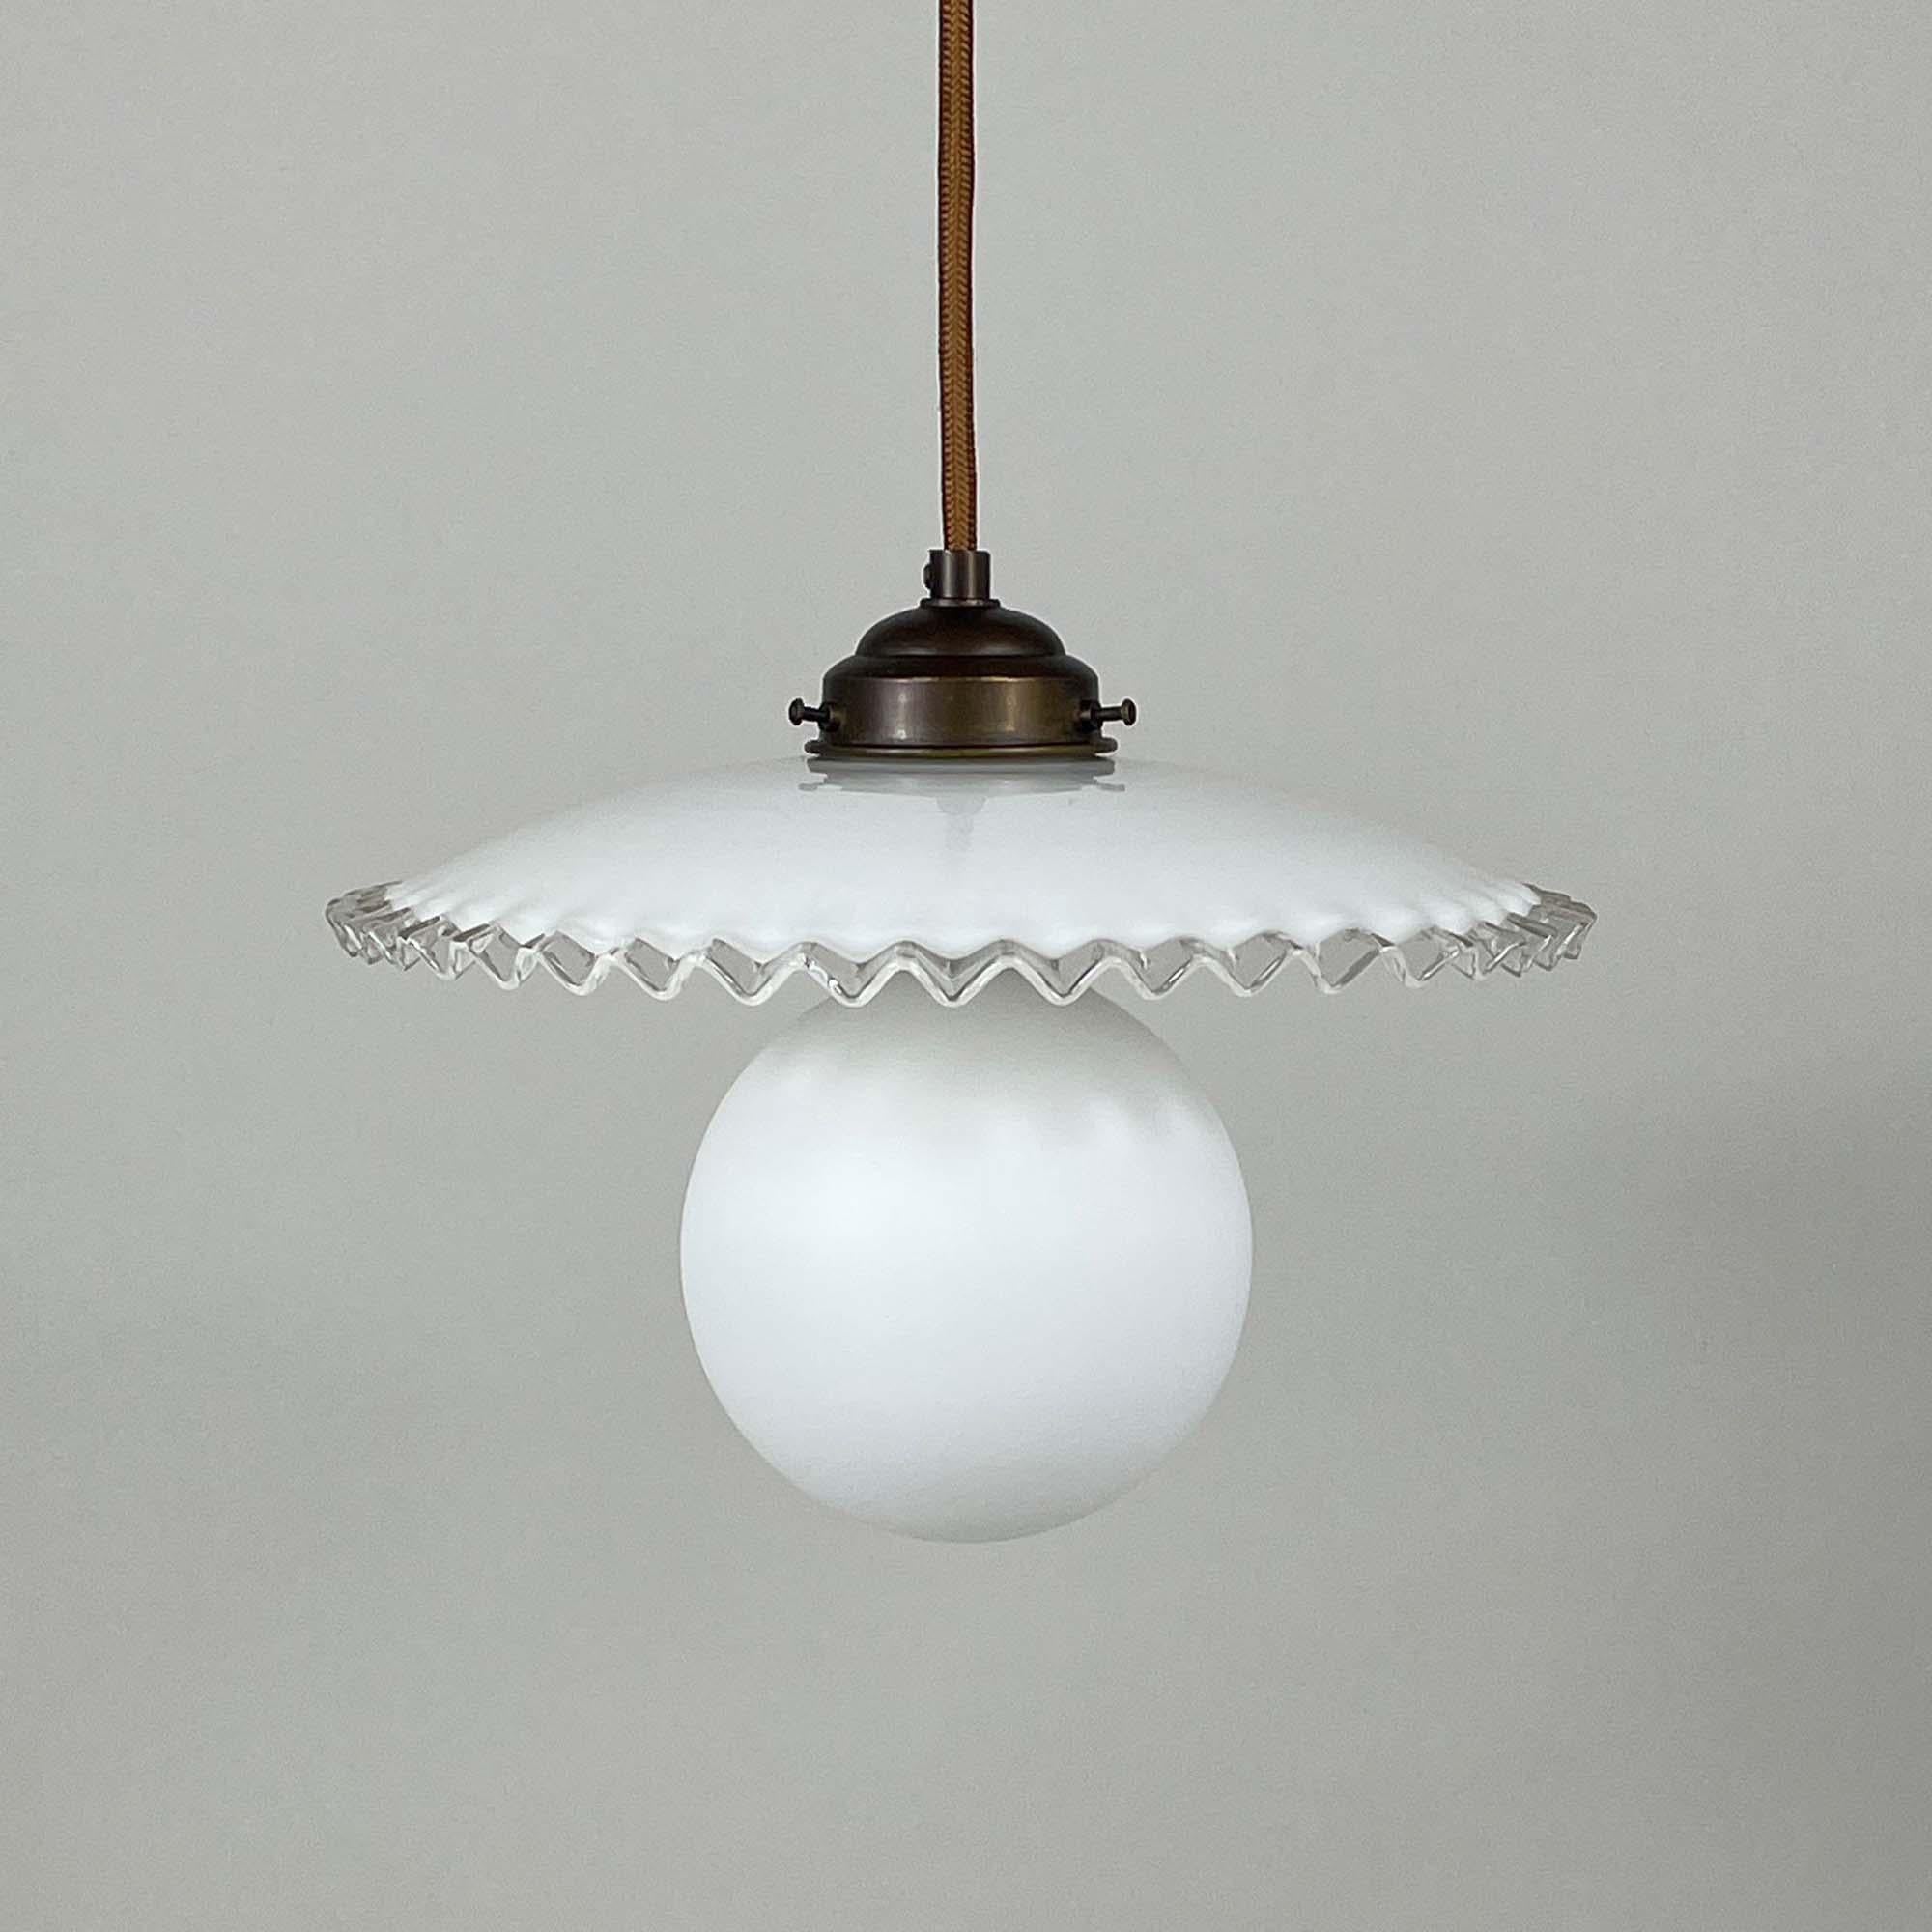 These pendant light was designed and manufactured in France in the 1950s. The lamp features a white opaline pleated glass lampshade with bronzed brass holder. It requires one E27 bulb up to 60 Watt (LED recommended) and has been rewired with new